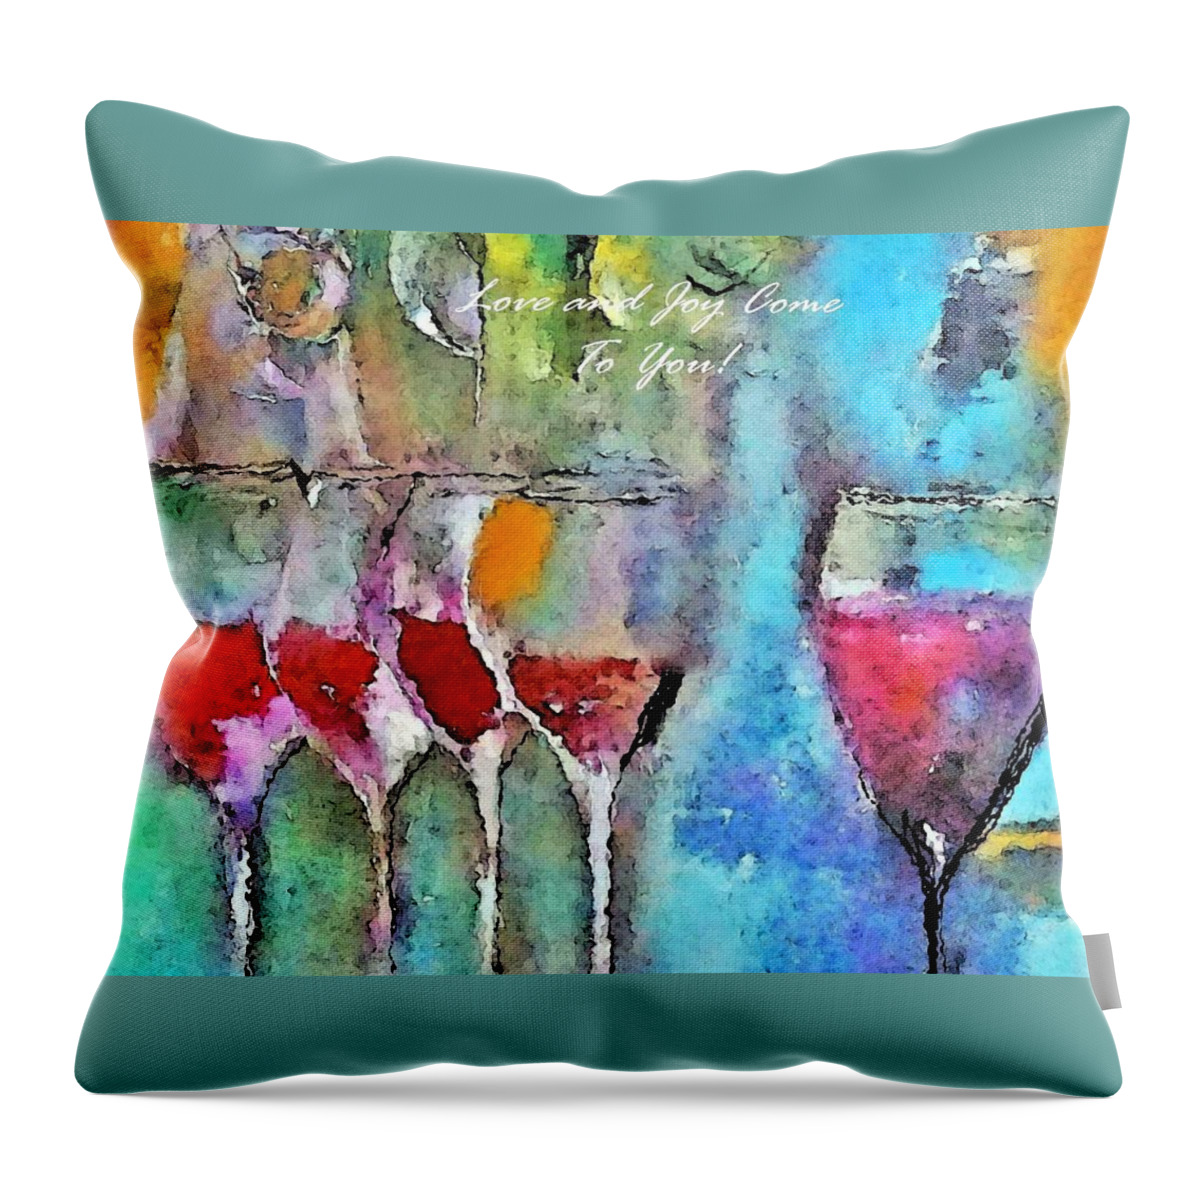 Celebration Throw Pillow featuring the painting Love And Joy Come To You by Lisa Kaiser